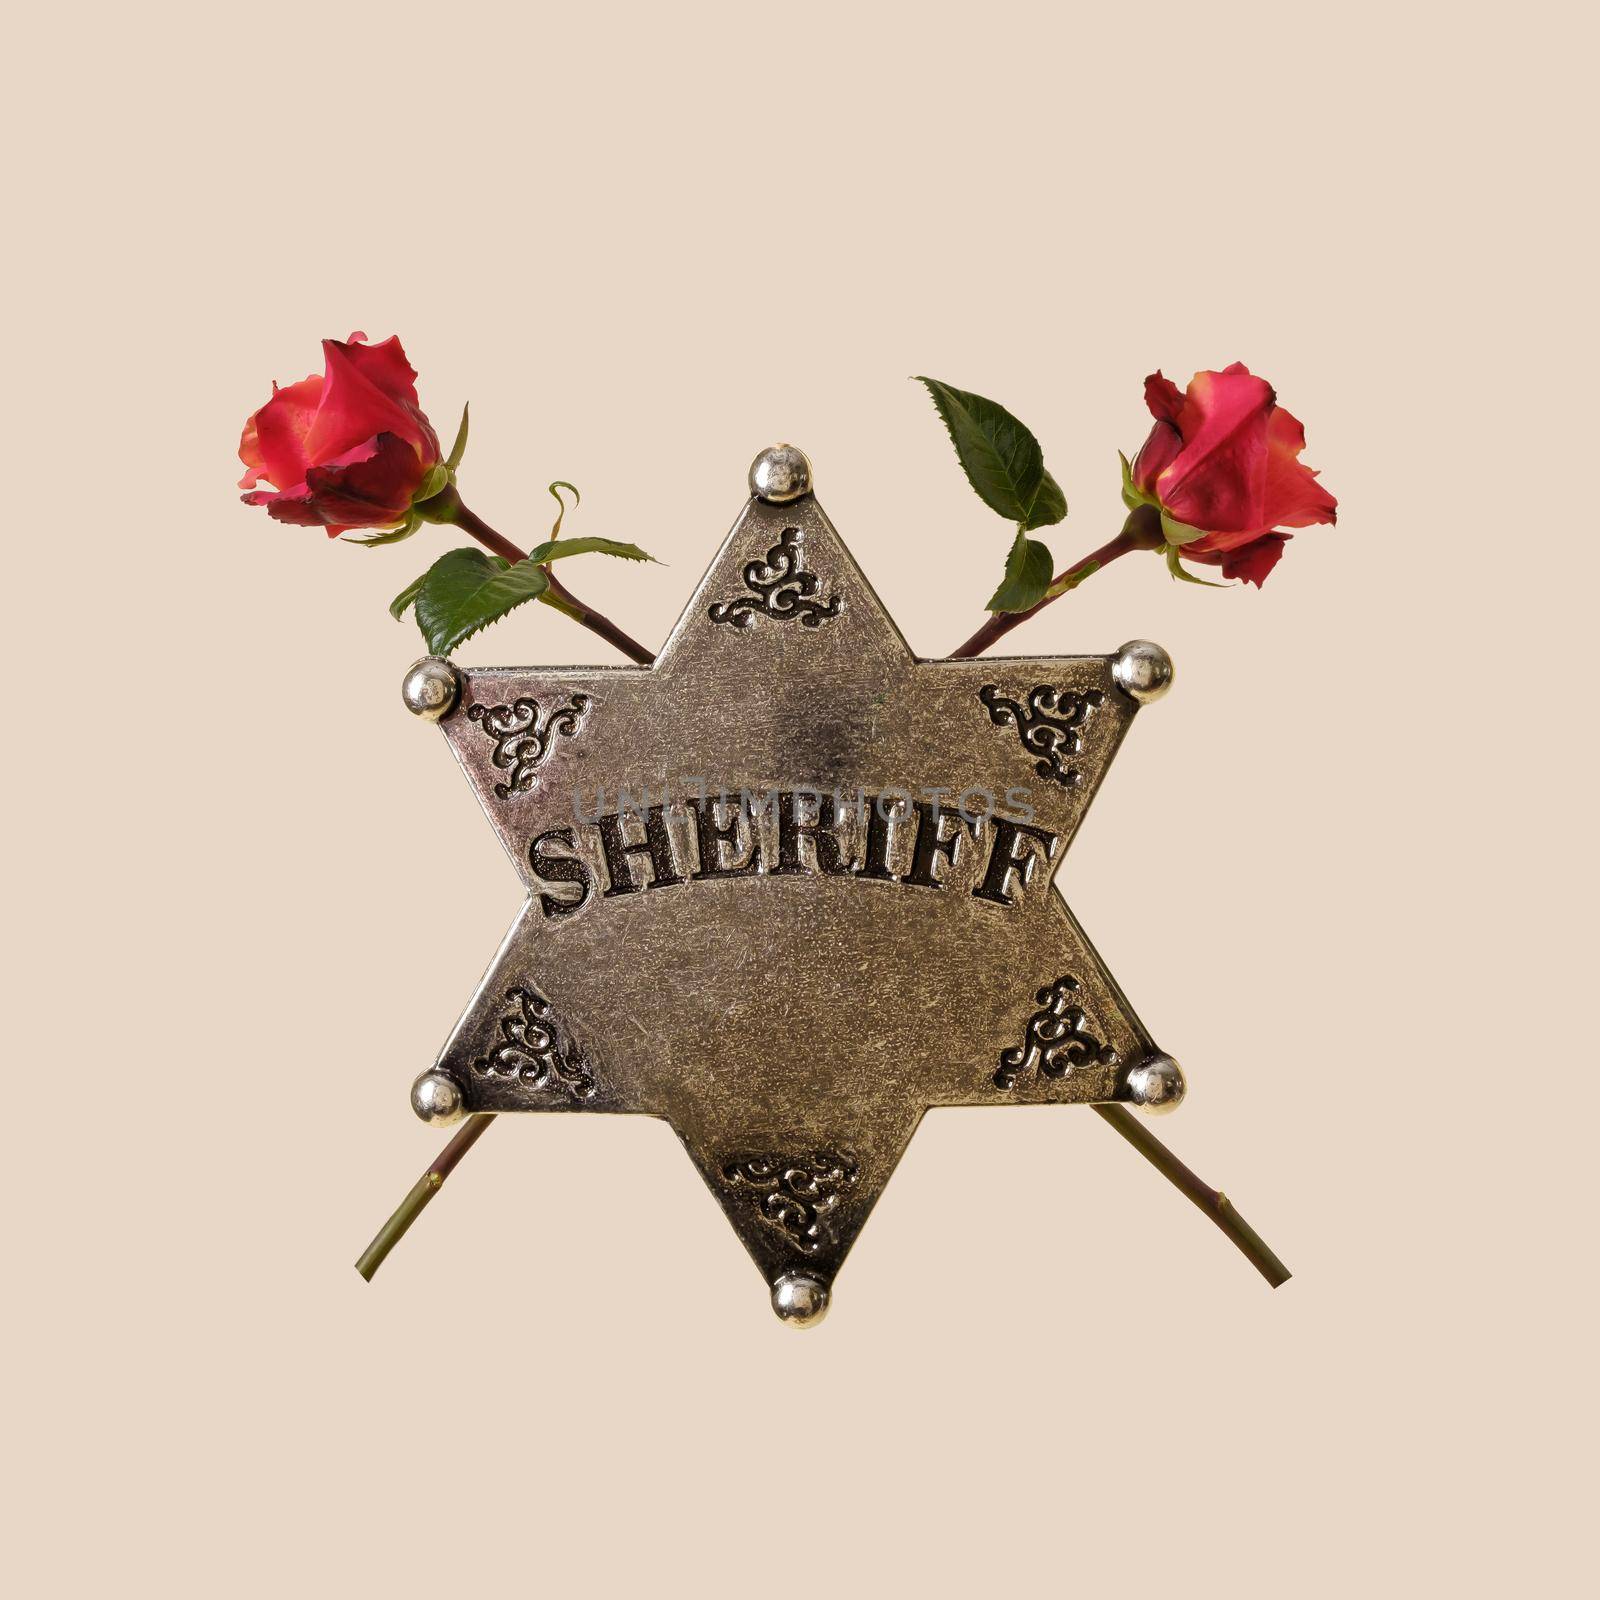 Sheriff star and roses concept of wild west law enforcement police detective and love and holiday.